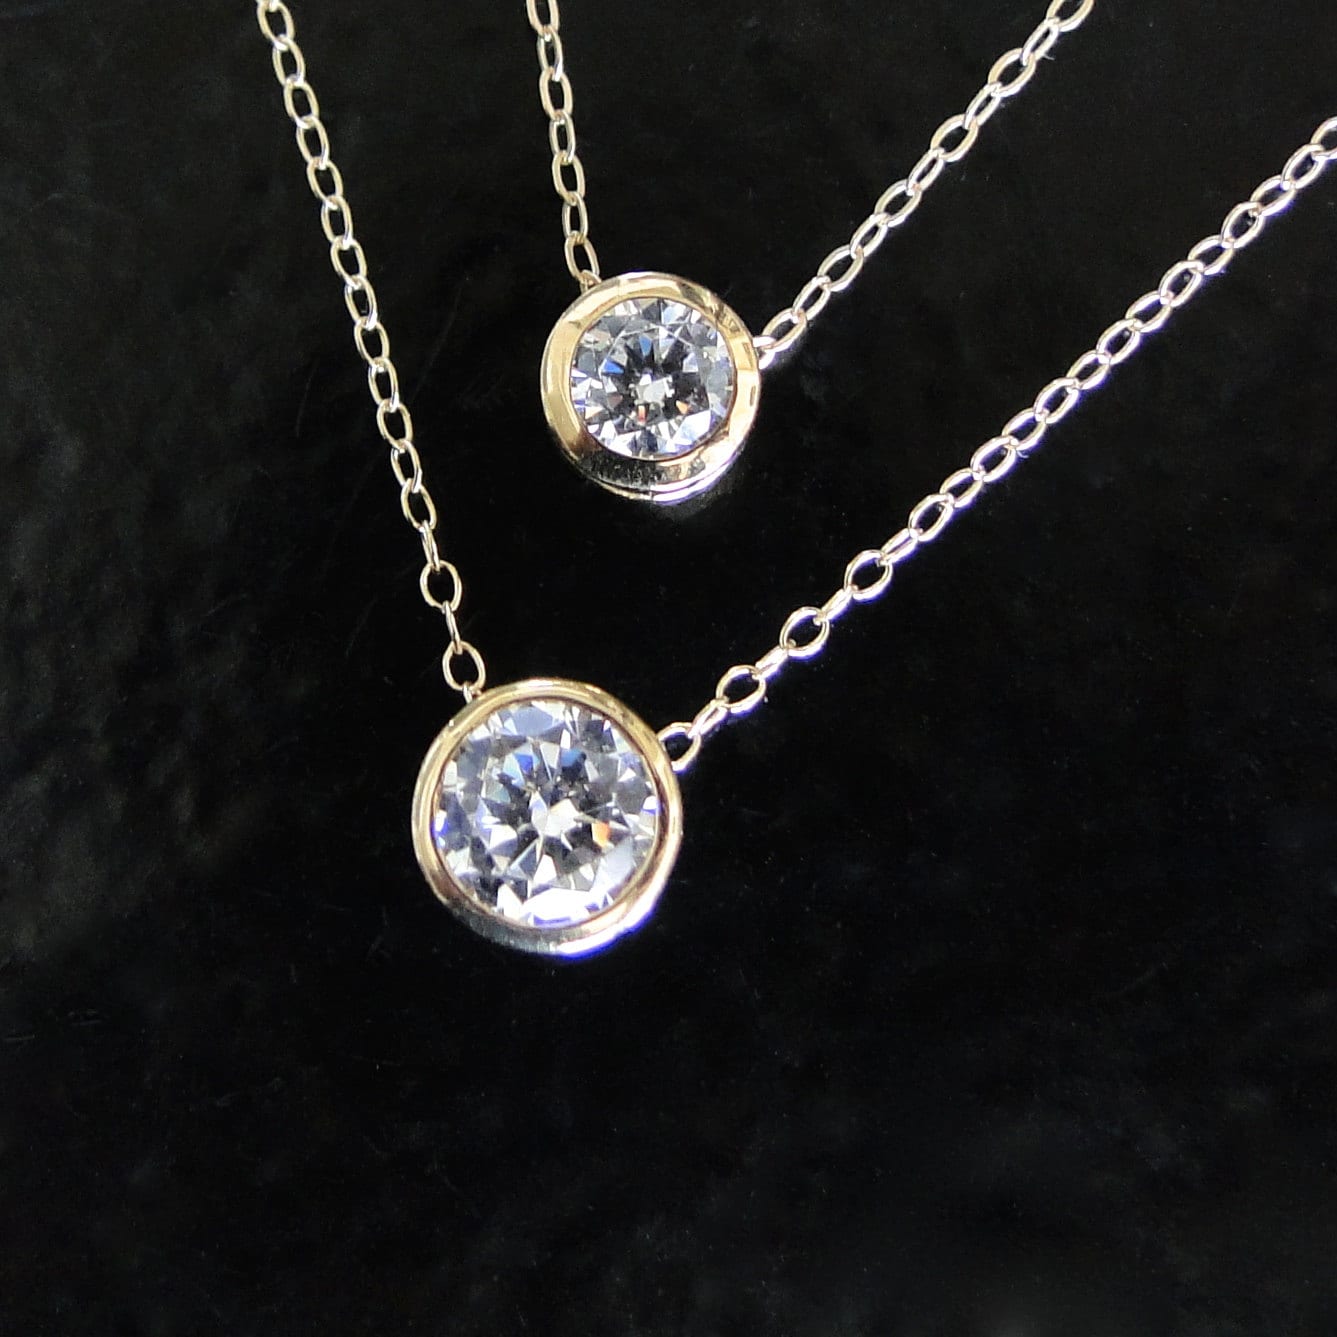 14k Yellow/White Gold Cubic Zirconia Small 7mm Star Solitaire Pendant Necklace